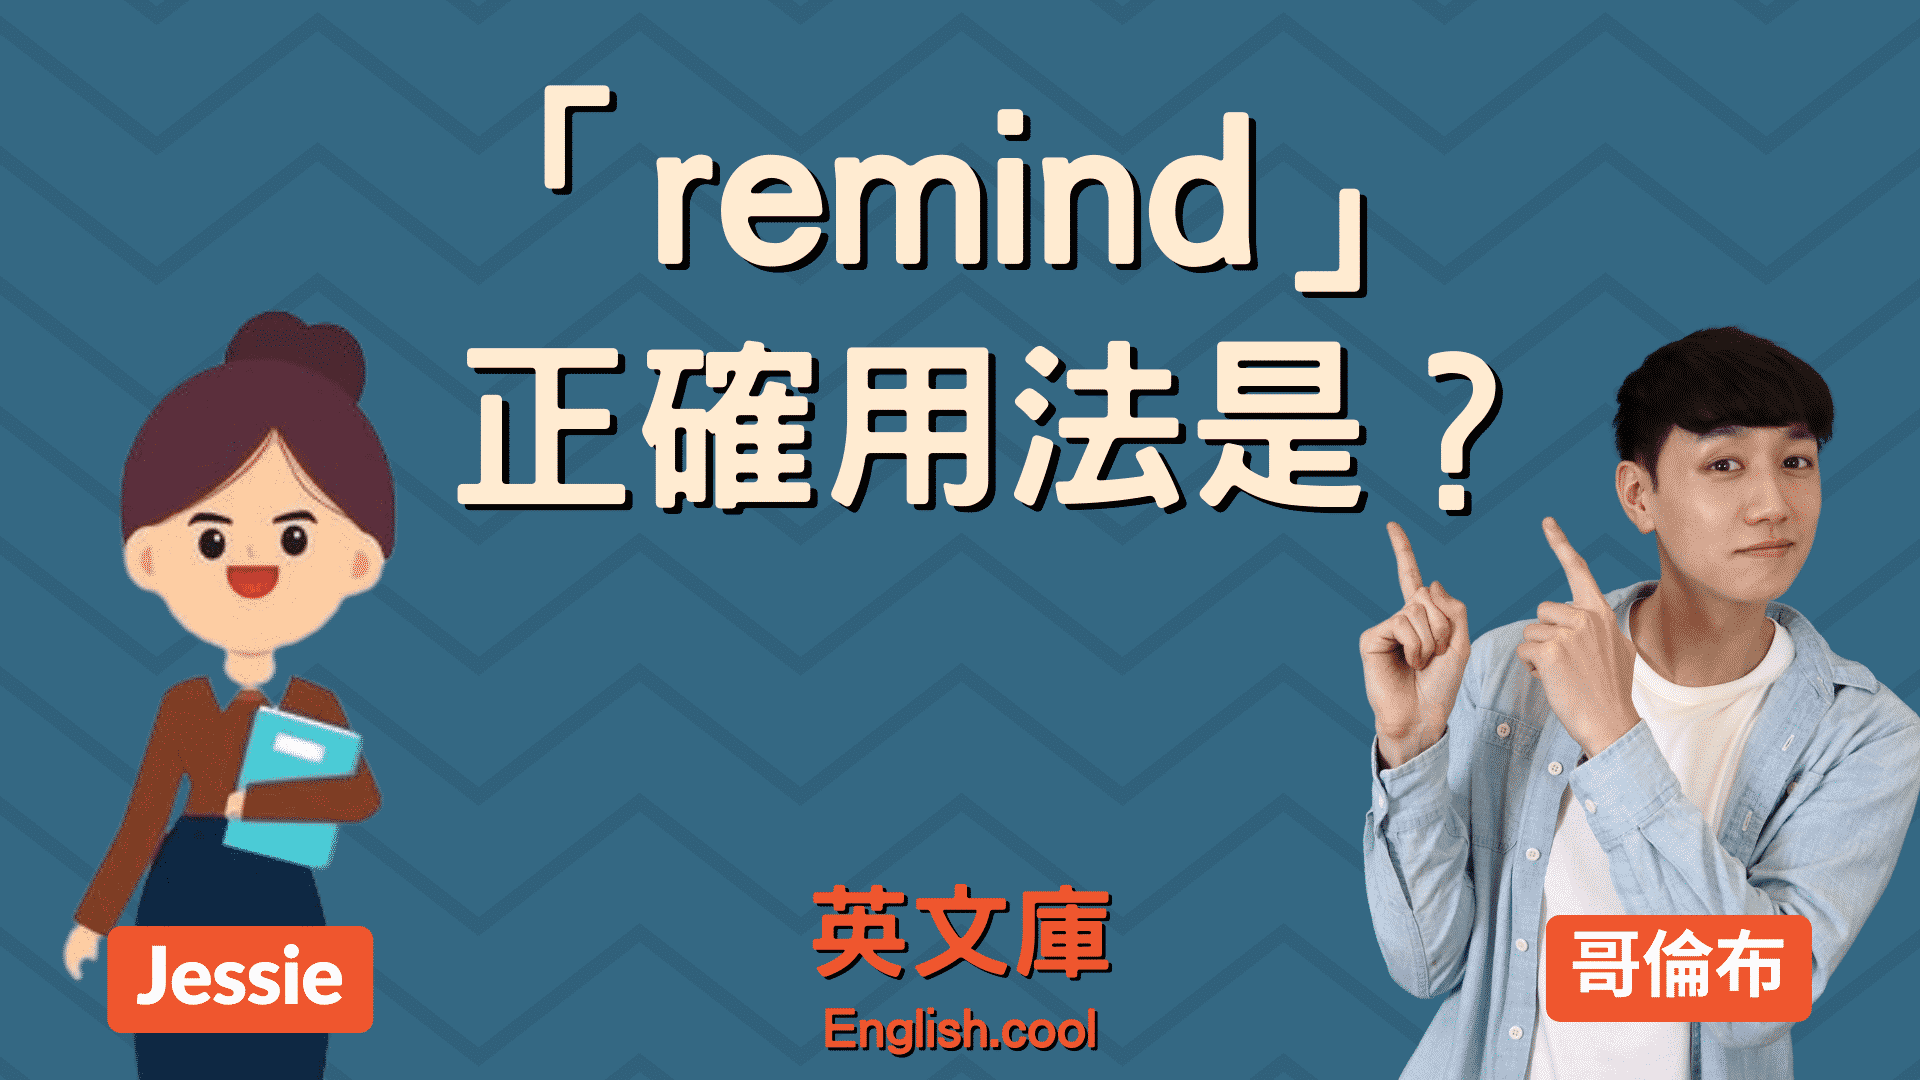 You are currently viewing 「remind」正確用法是？來看例句搞懂！